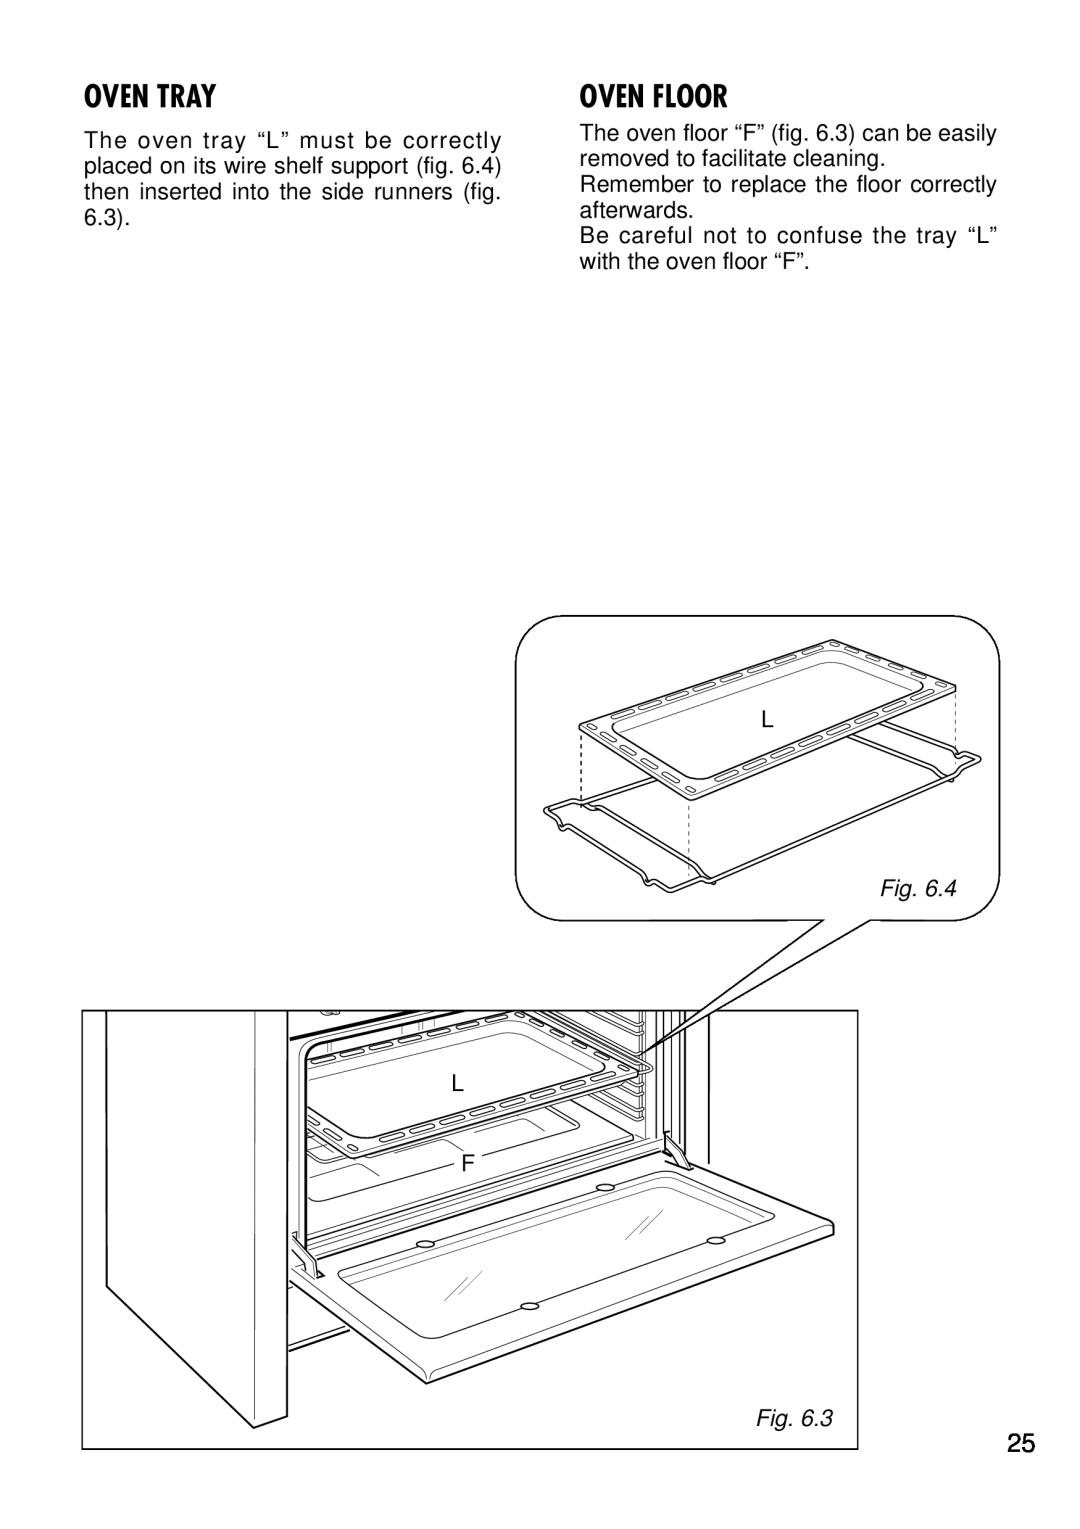 Kenwood CK 680 manual Oven Tray, Oven Floor, Remember to replace the floor correctly afterwards 